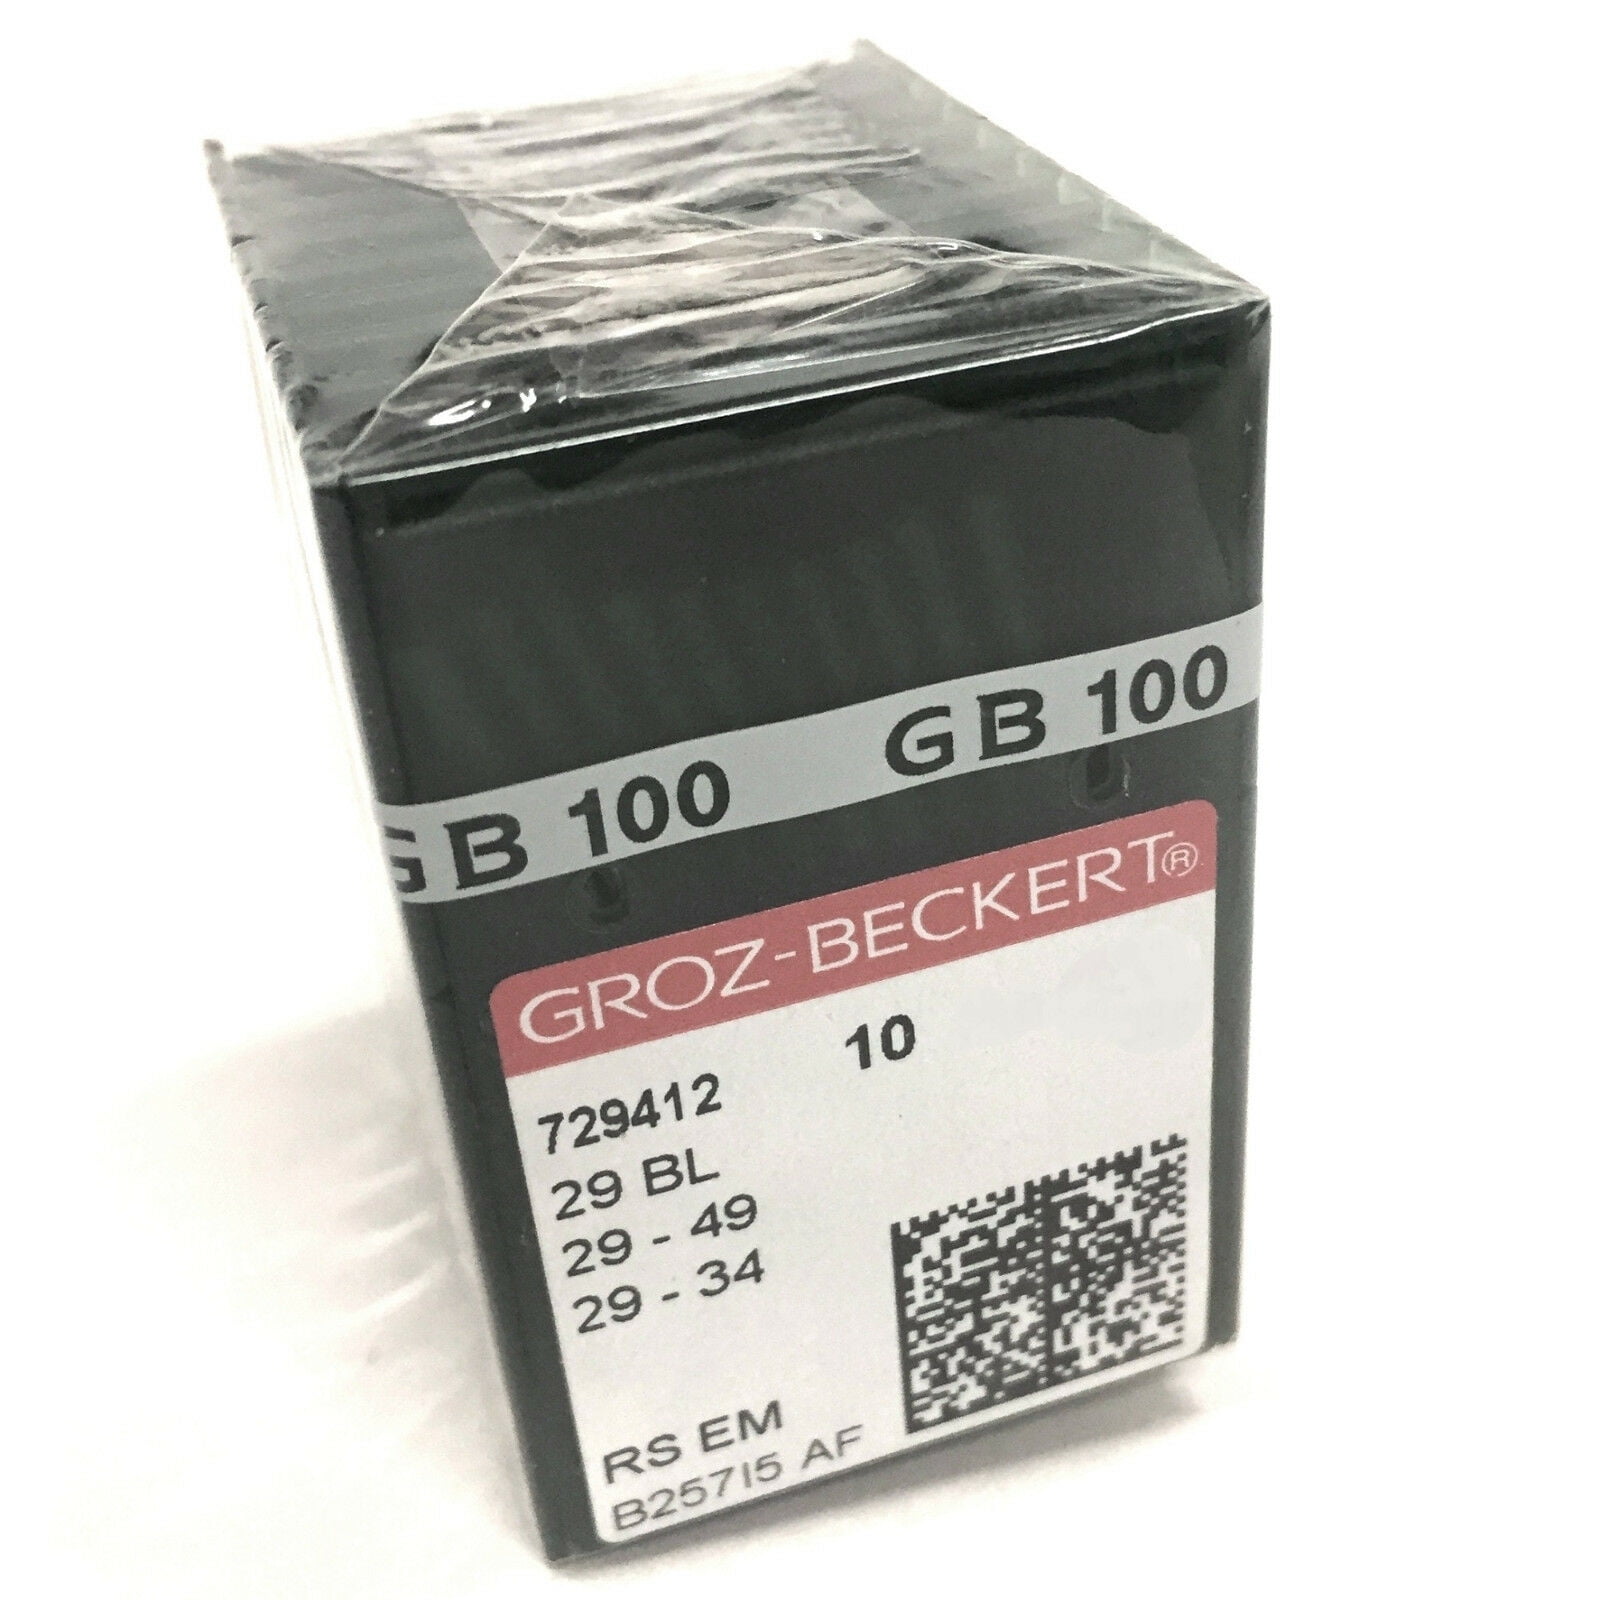 GROZ-BECKERT 29BL SIZE:100/16 RS EM CURVED INDUSTRIAL SEWING MACHINE NEEDLES 